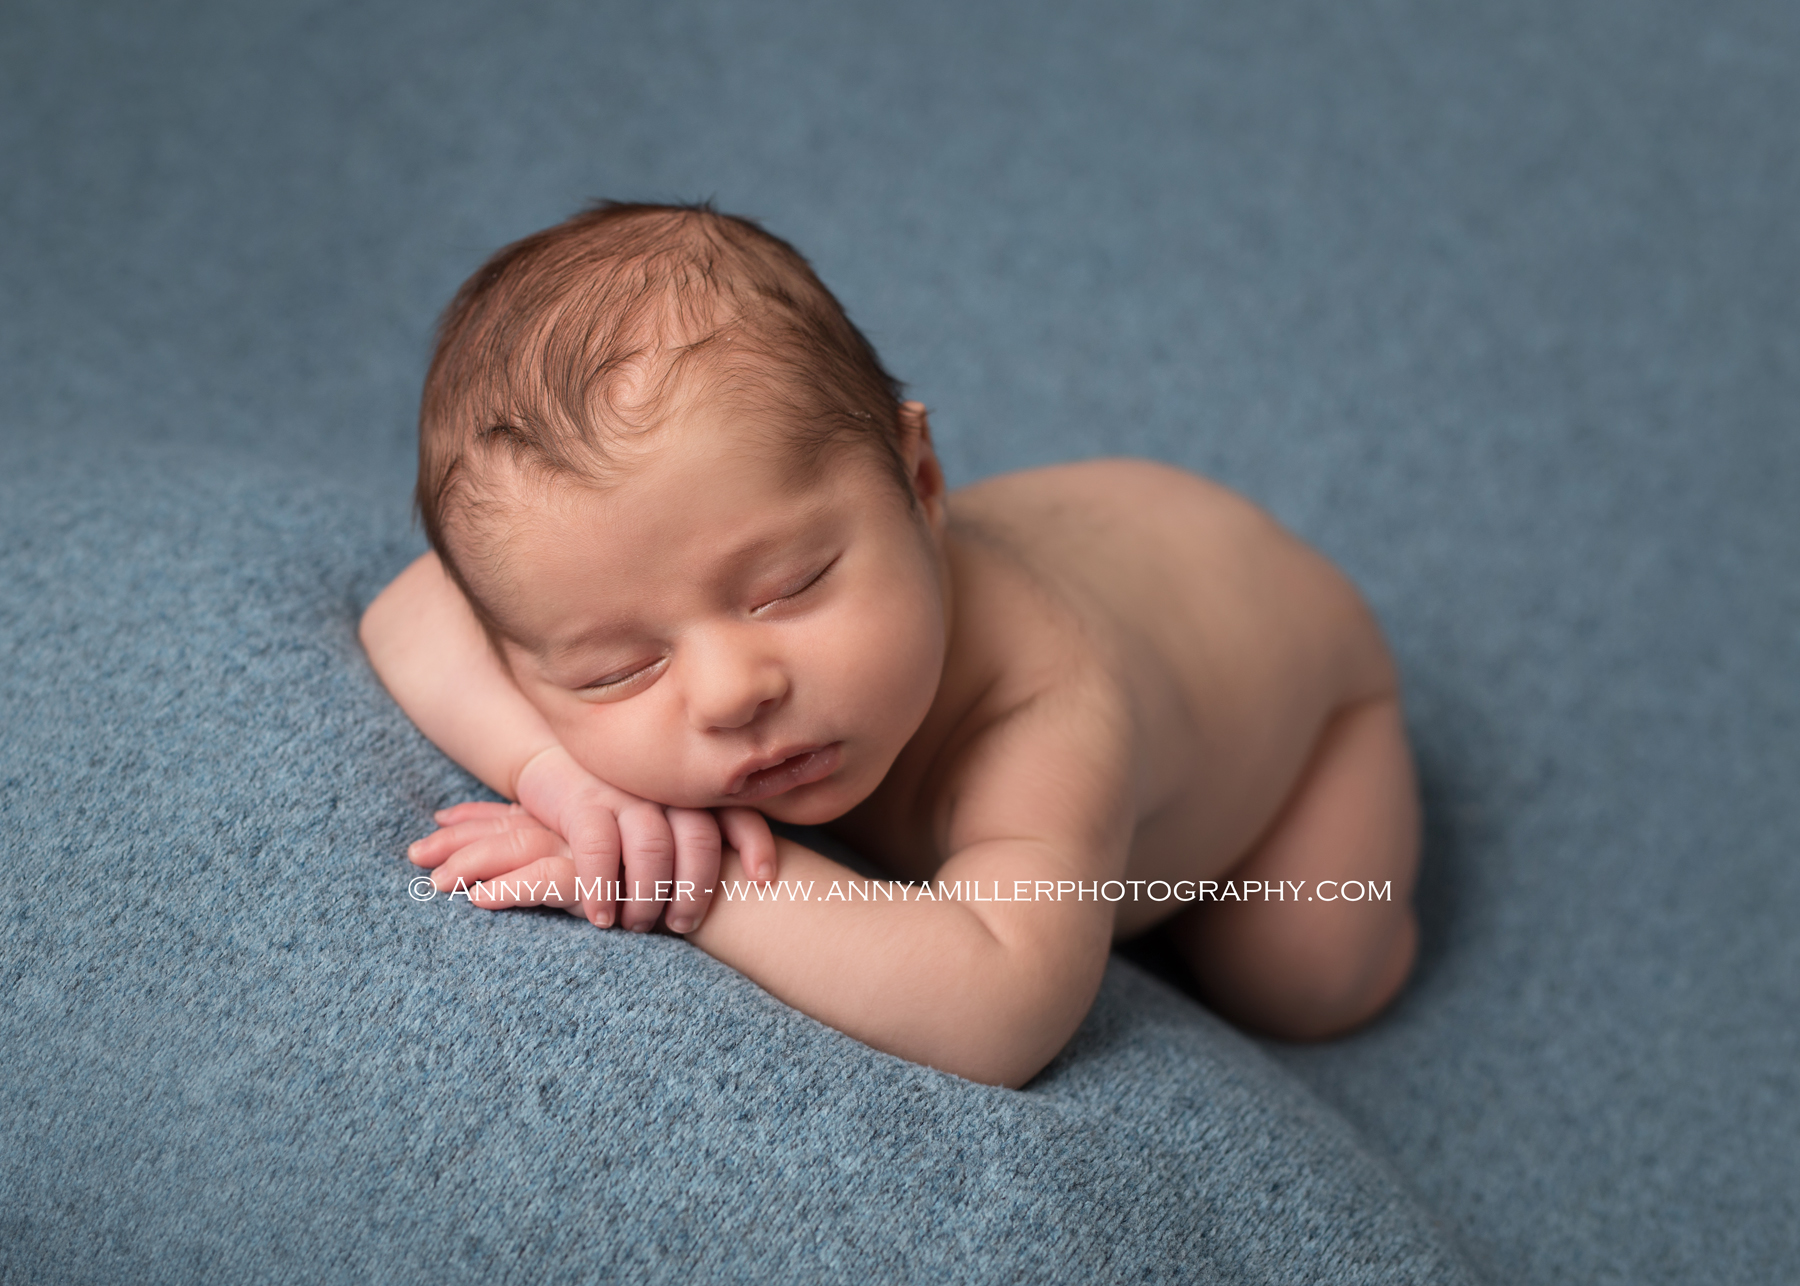 Adorable baby photographs by newborn photographer in Pickering, Annya Miller